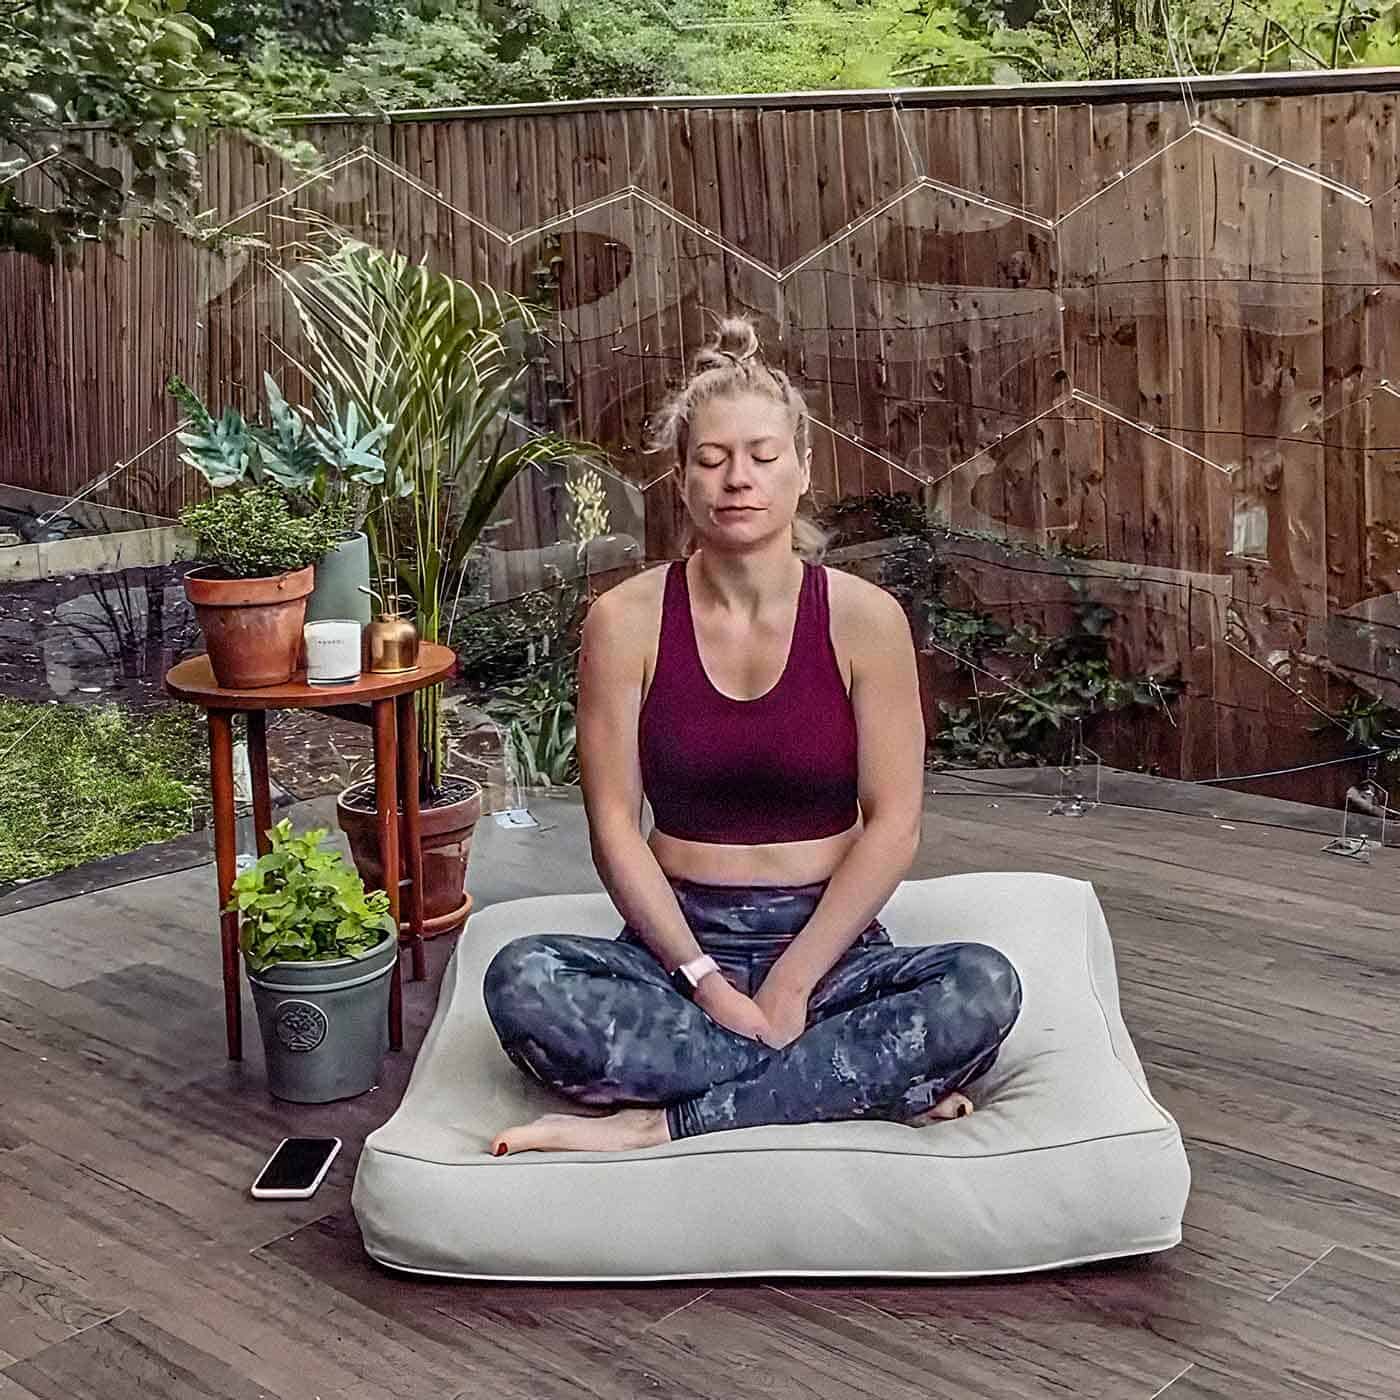 A woman meditating on a floor cushion next to some plants inside a garden dome